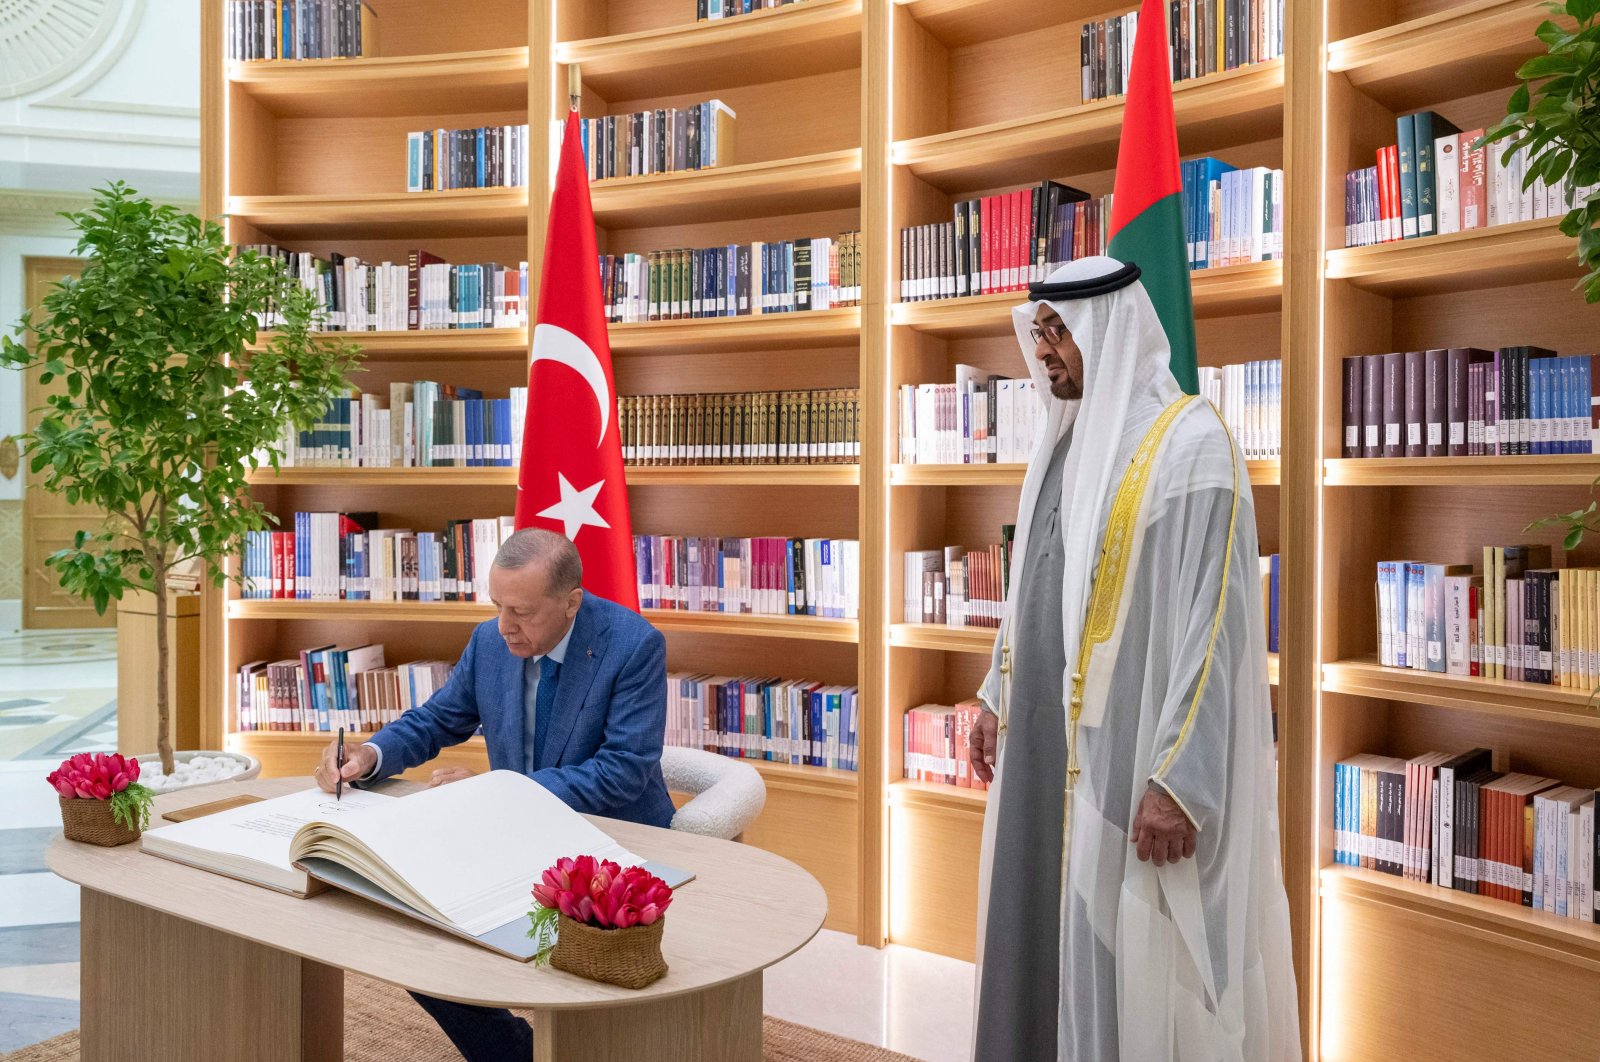 United Arab Emirates (UAE) President Sheikh Mohammed bin Zayed Al Nahyan (R) looks on as President Recep Tayyip Erdoğan signs the guest book during an official reception in Abu Dhabi, UAE, July 19, 2023. (AFP Photo)